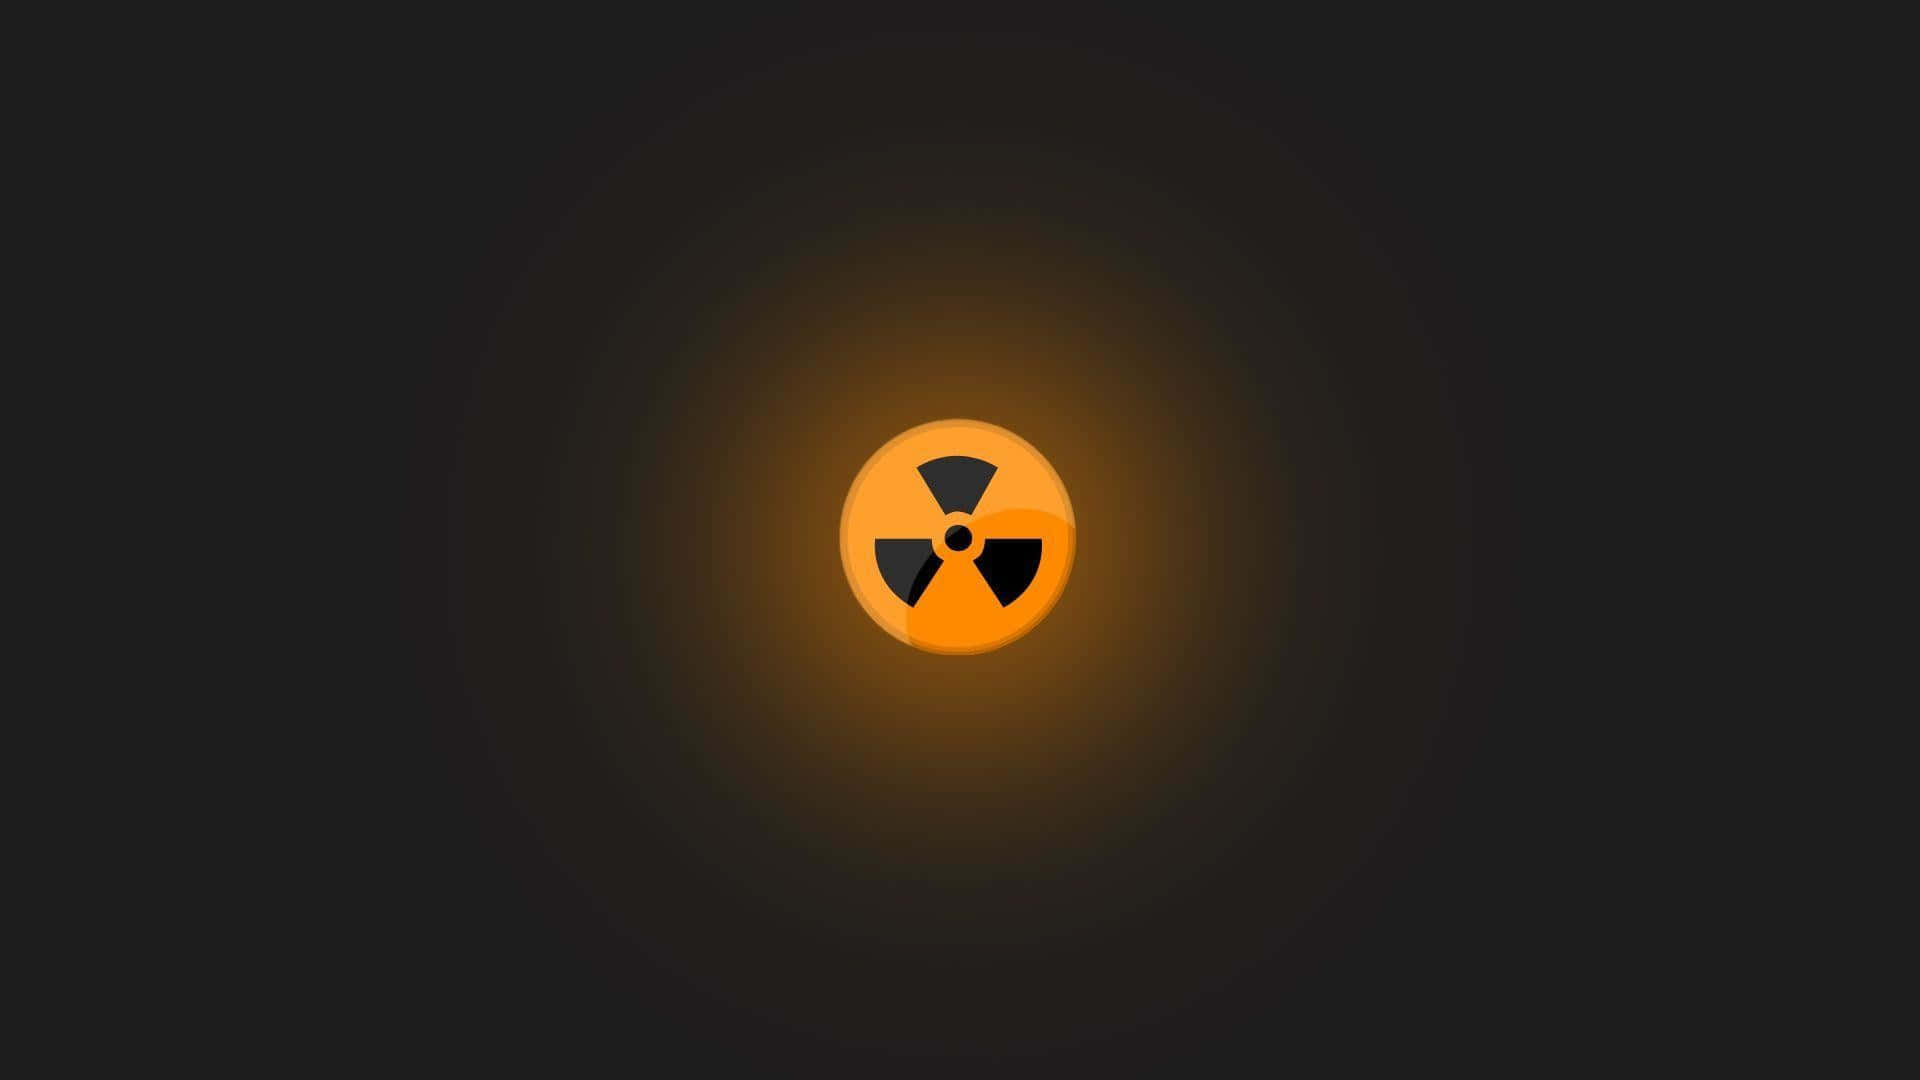 Post-apocalyptic Fallout Nuke explosion in the city Wallpaper